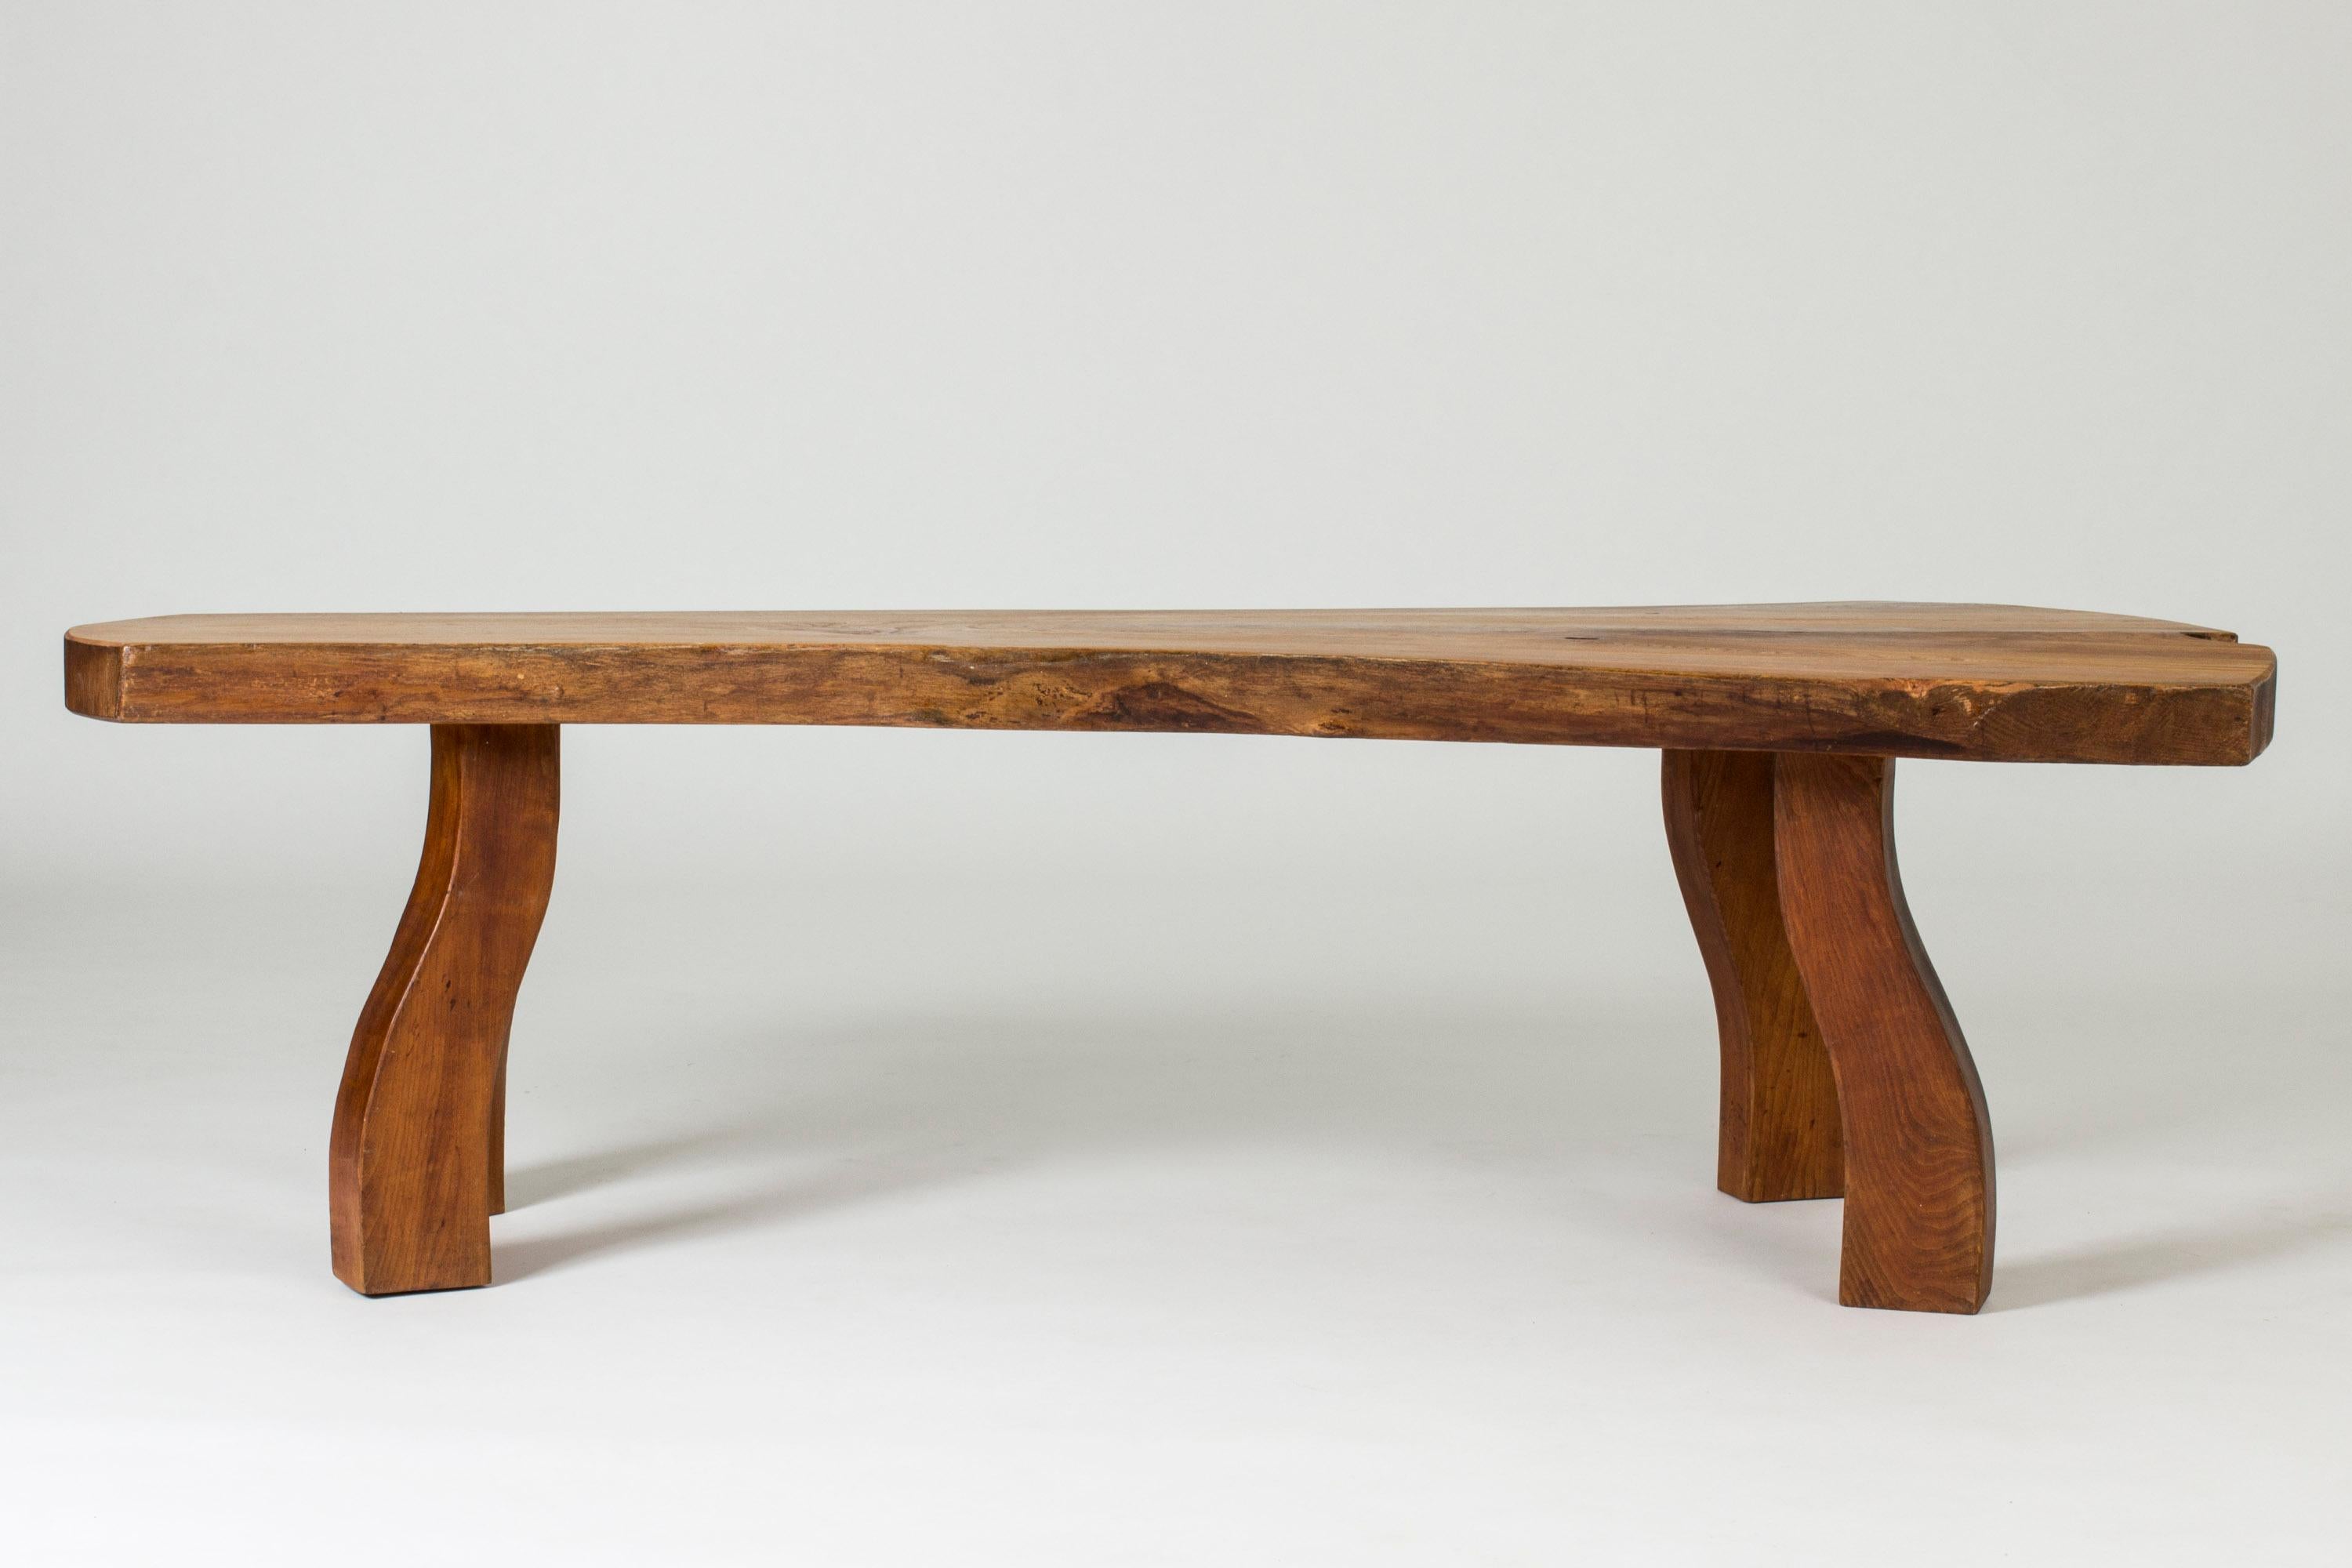 Striking elmwood coffee table by Carl-Axel Beijbom, made from an elmwood slab with lovely wood grain. Beautiful, oiled surface. Sturdy, sculpted legs that pick up the organic design of the tabletop.

The story of the striking elmwood tables from